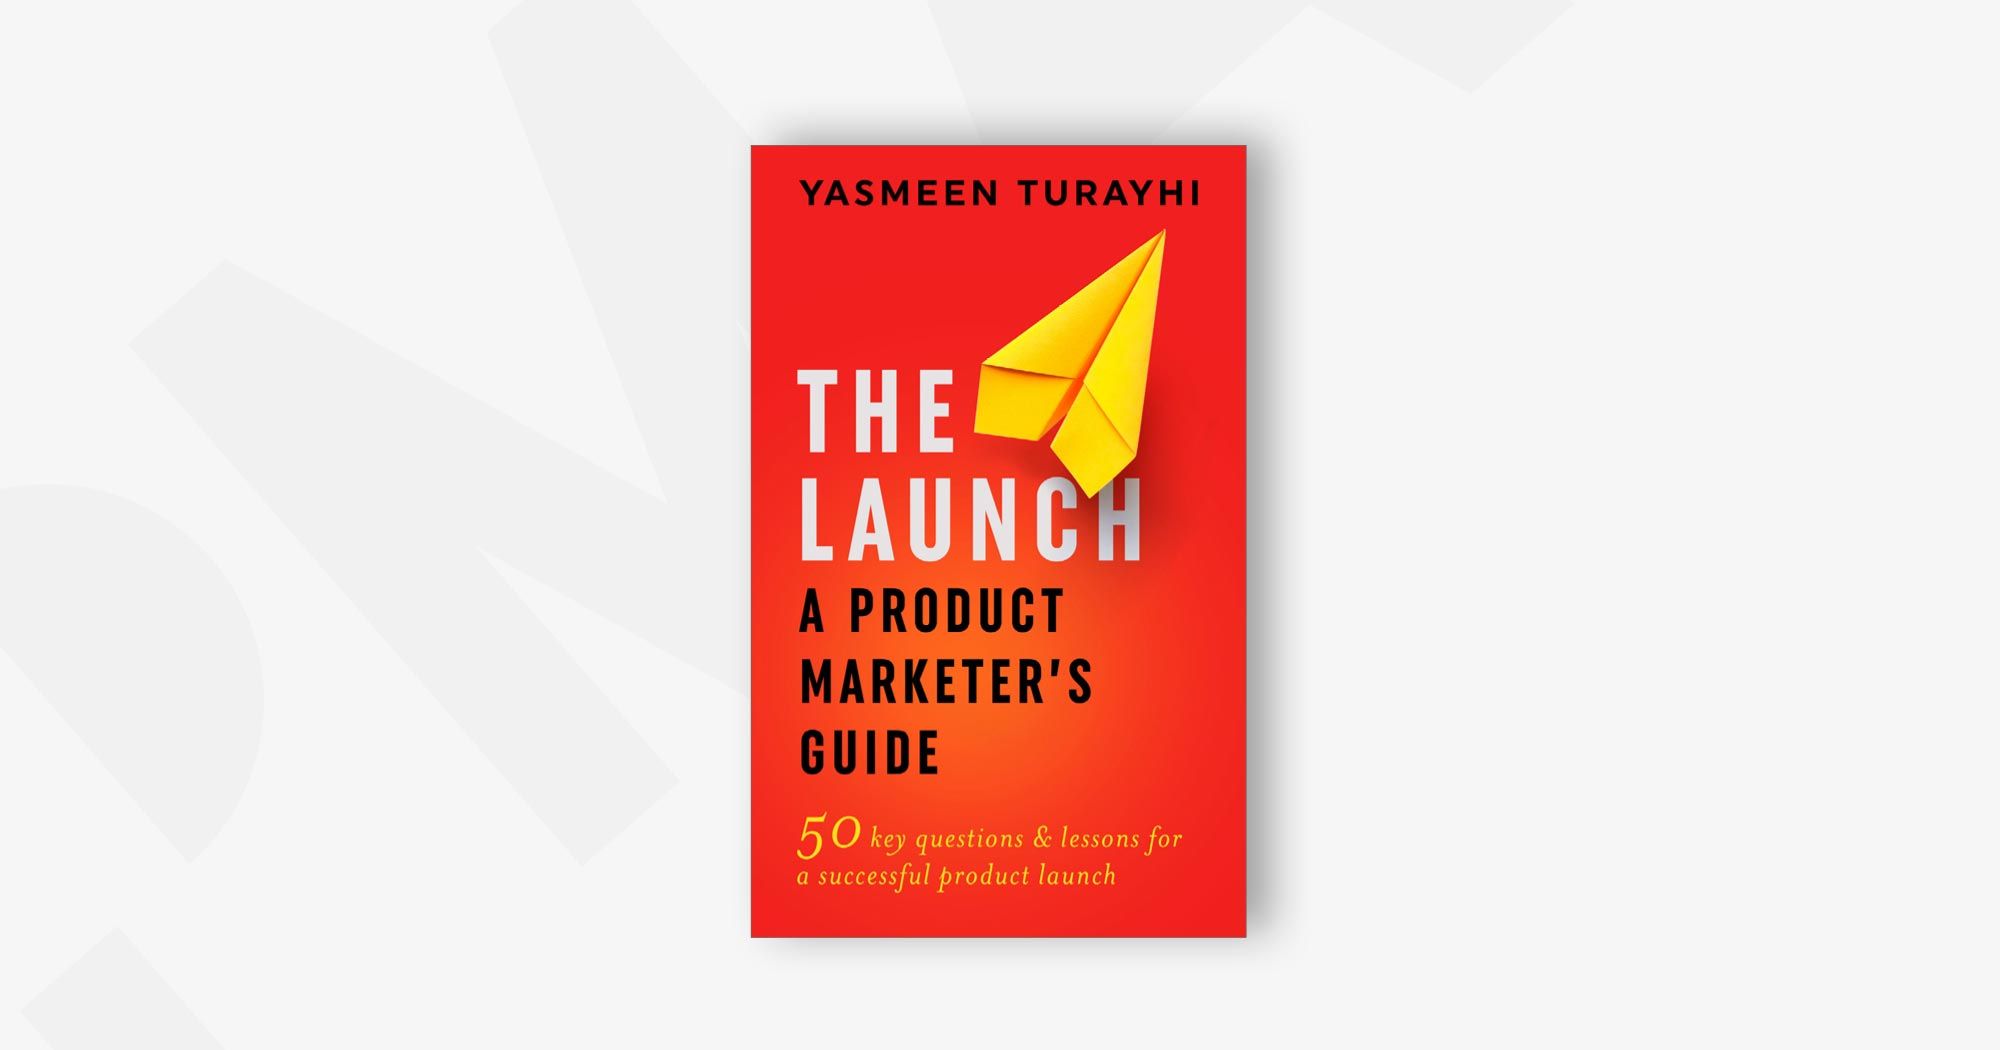 The Launch: A Product Marketer's Guide: 50 key questions & lessons for a successful launch – Yasmeen Turayhi and Sue Vander Hook